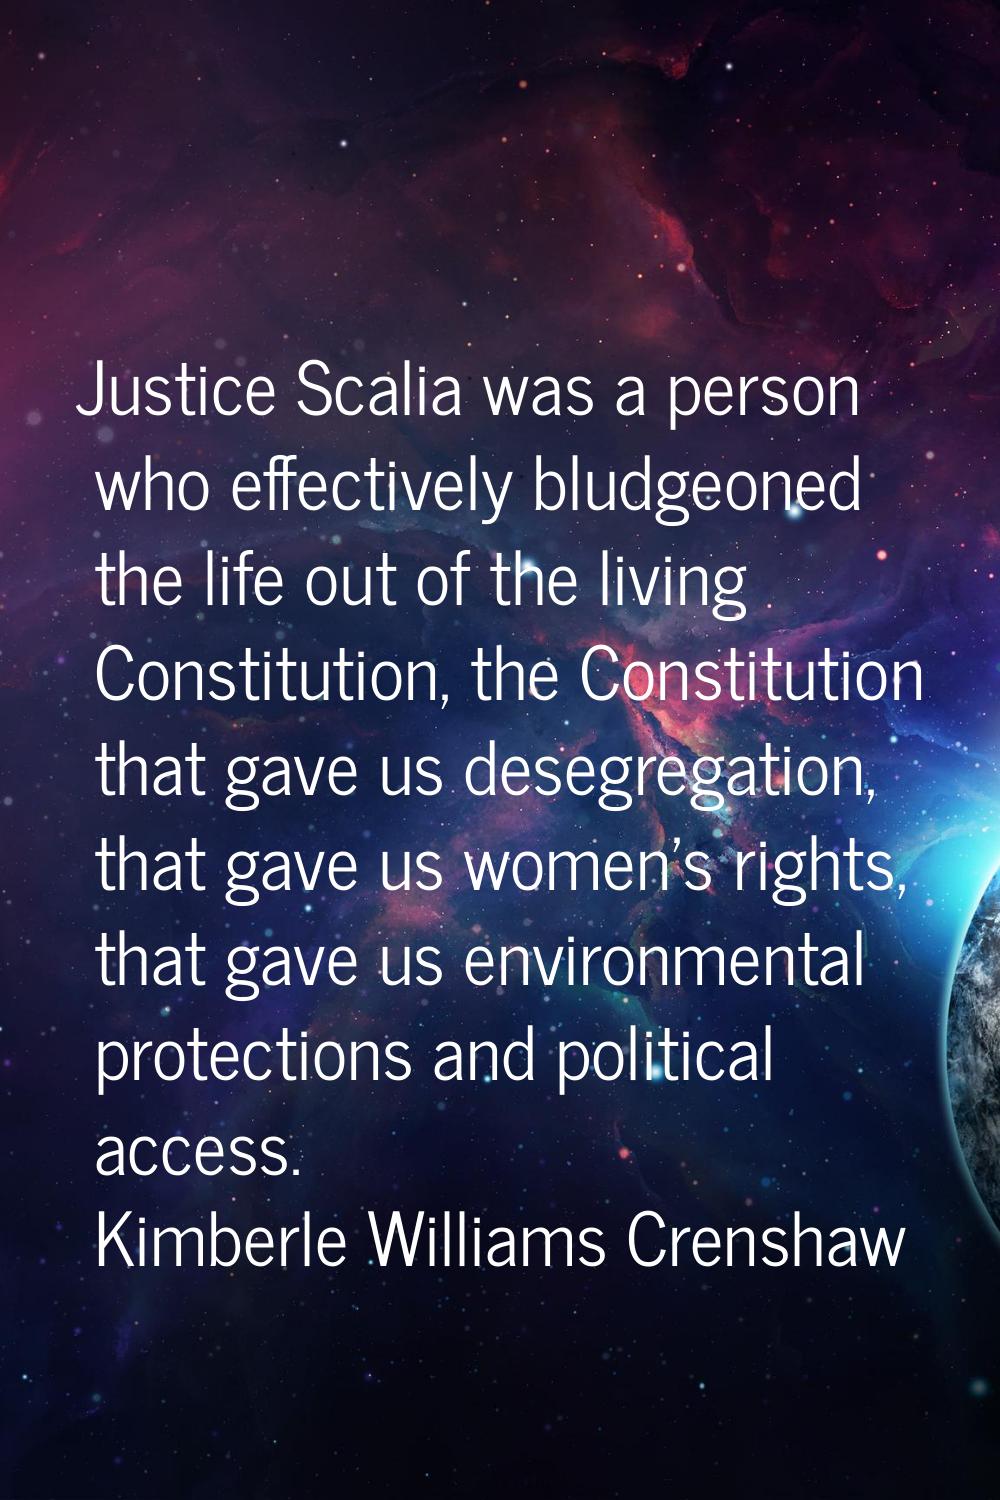 Justice Scalia was a person who effectively bludgeoned the life out of the living Constitution, the